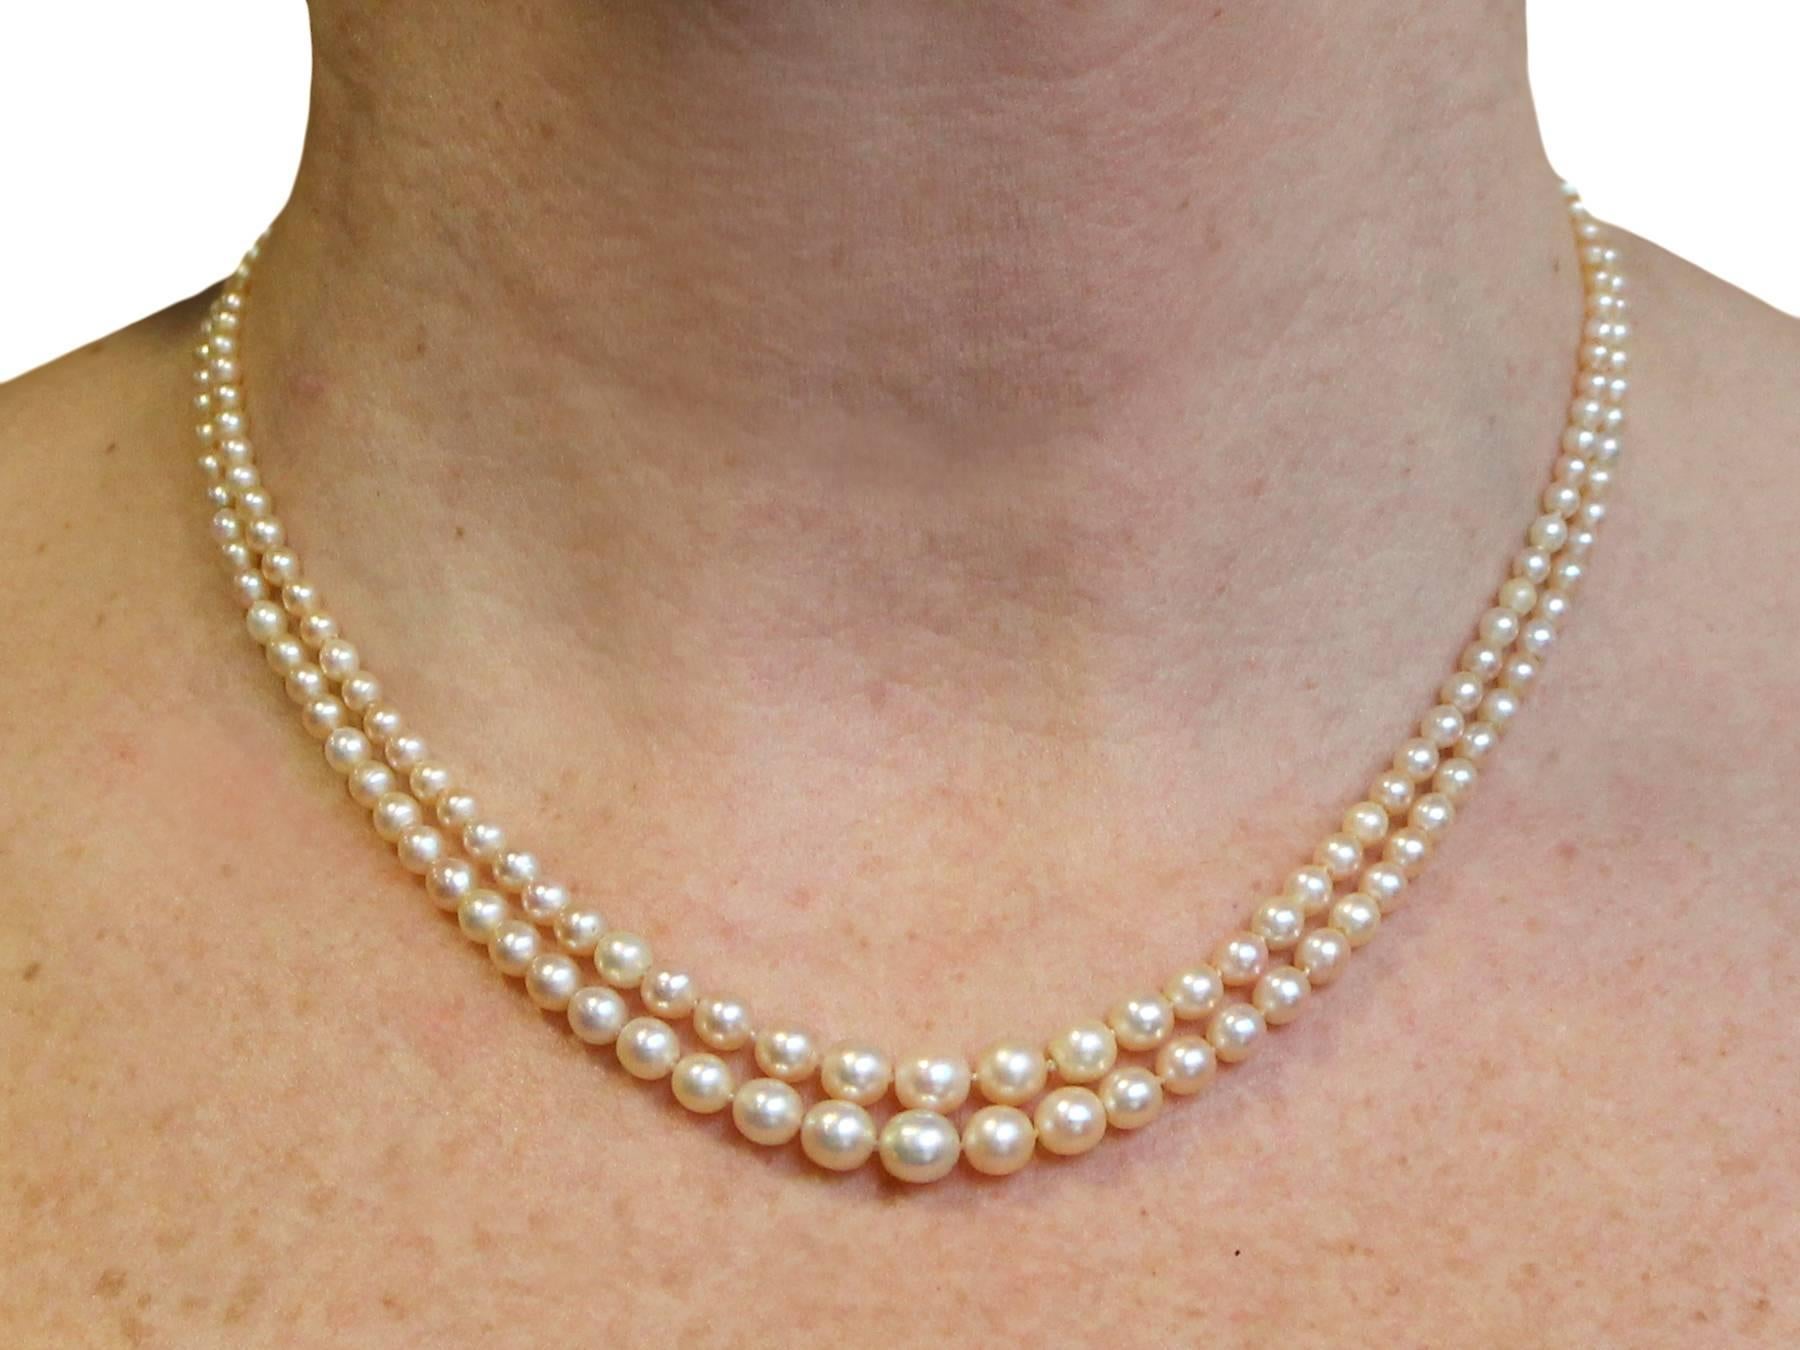 Women's Double Strand Pearl Necklace with 0.55Ct Diamond, White Gold Clasp - Antique